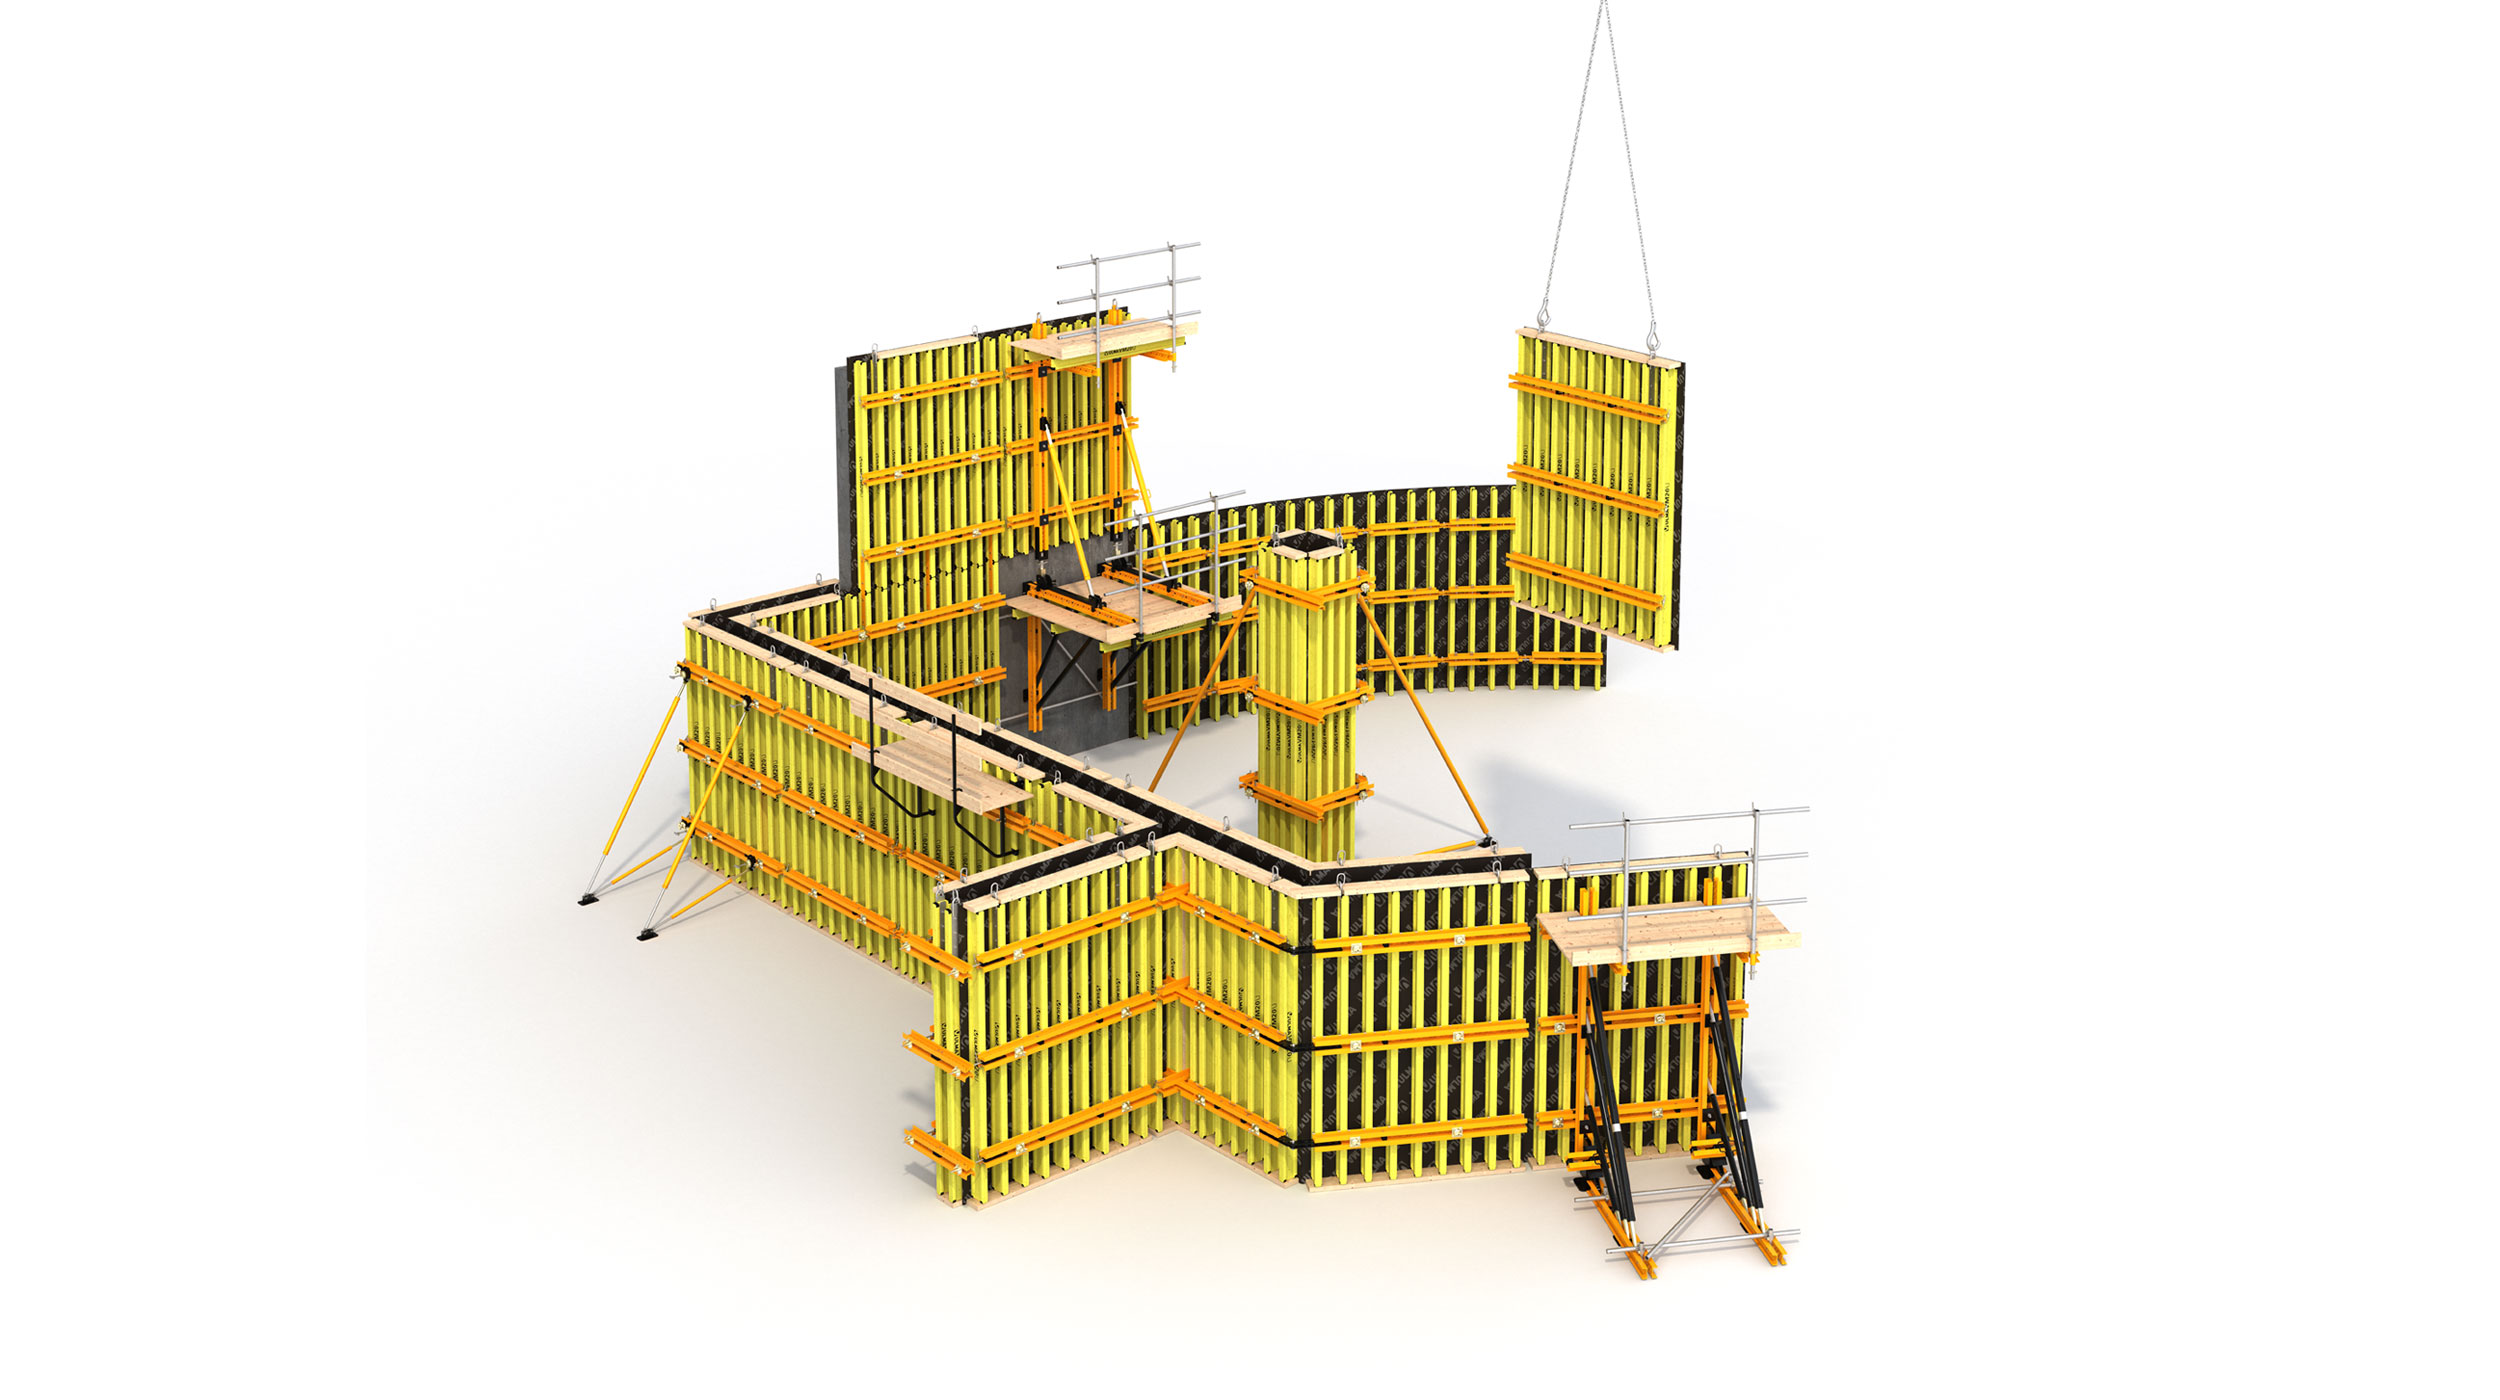 Flexible and versatile beam formwork system for civil engineering and building construction. Highly efficient and excellent concrete finish.